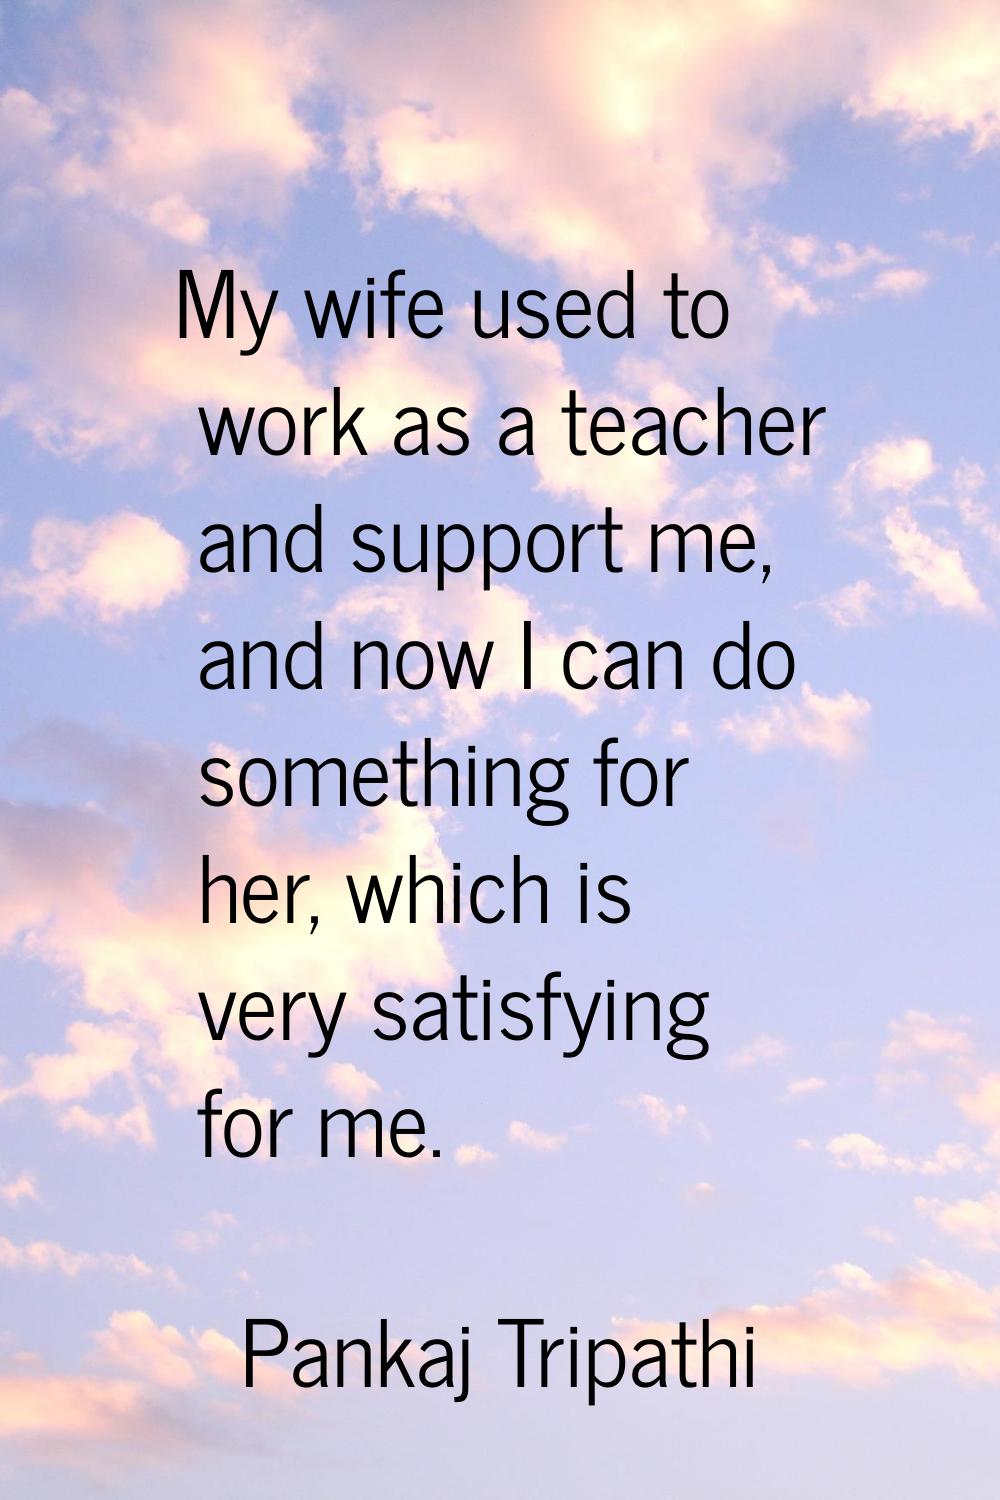 My wife used to work as a teacher and support me, and now I can do something for her, which is very